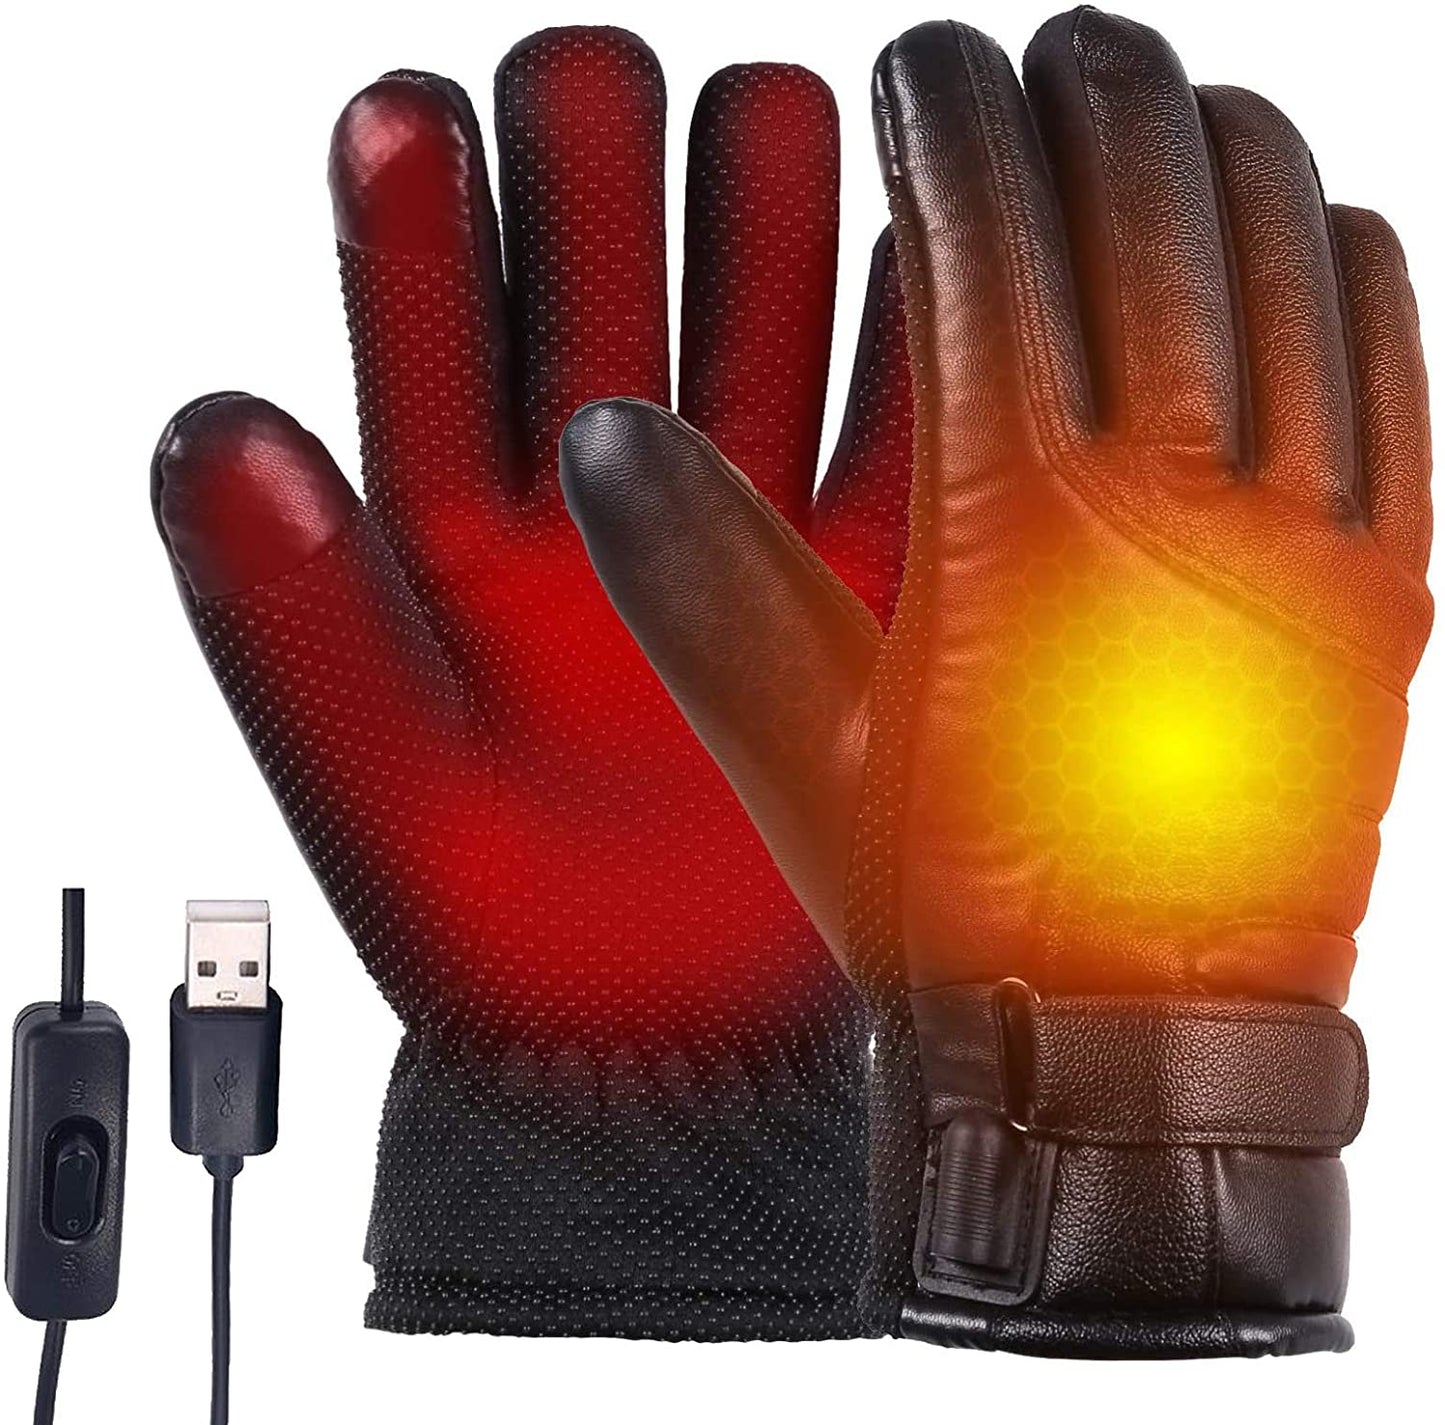 USB Heated Gloves, Electric Hand Warmer Winter Heating Gloves, Men Women Thermal Heated Gloves for Motorcycle, Working, Cycling, Fishing - Home Decor Gifts and More